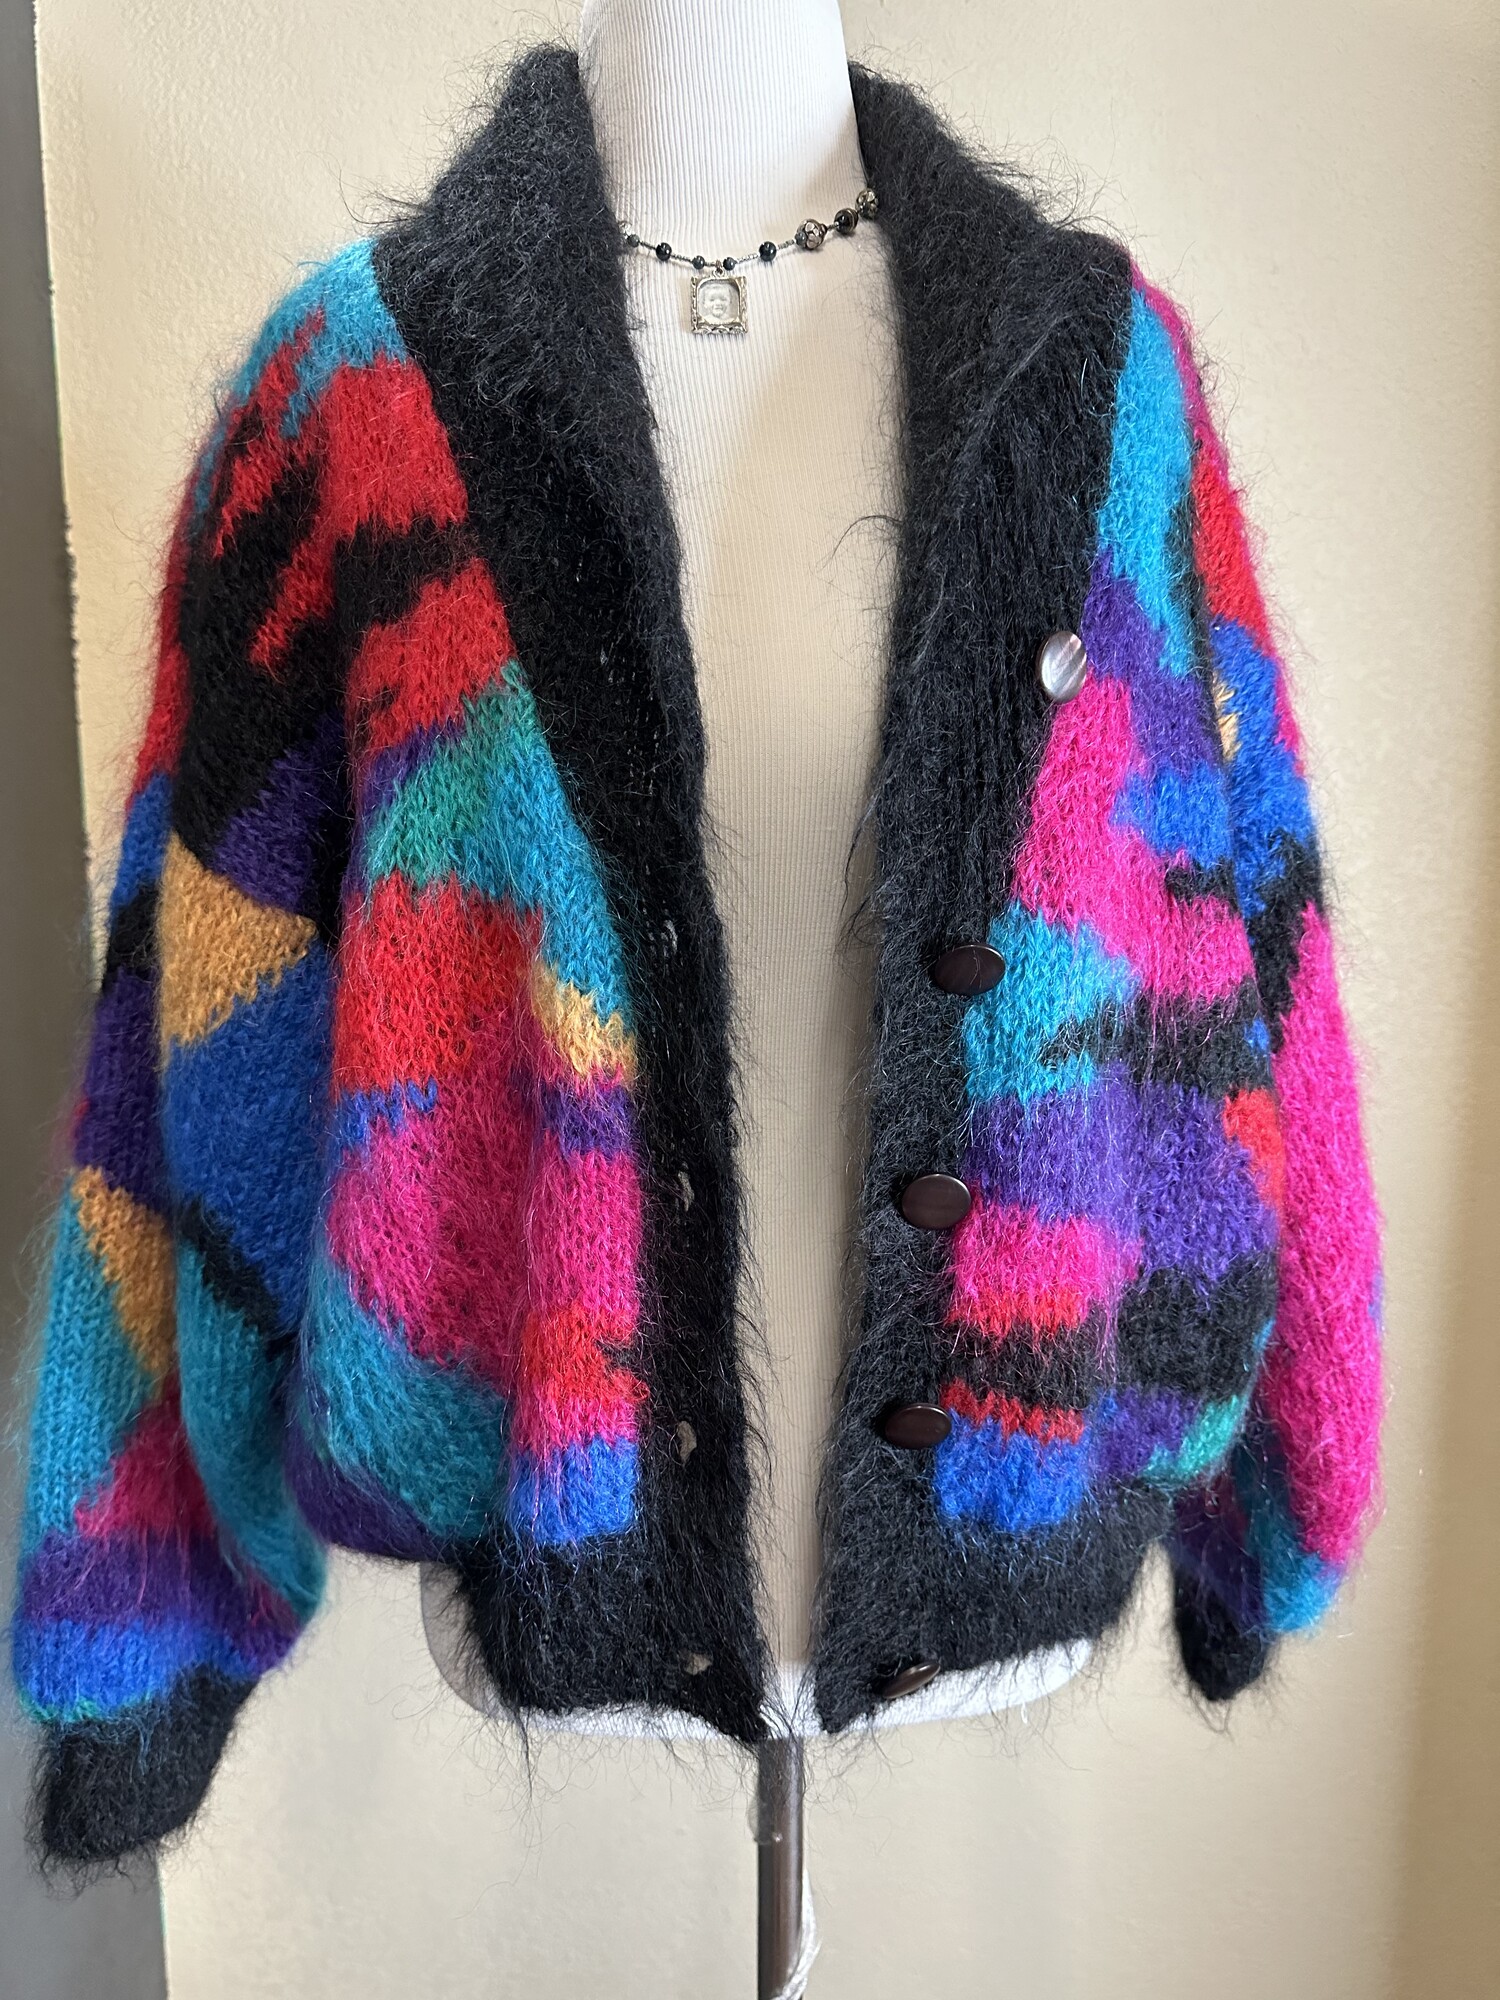 Late 80s/Early 90s funky colored chunky mohair cardigan sweater.  5 buttons and pockets.